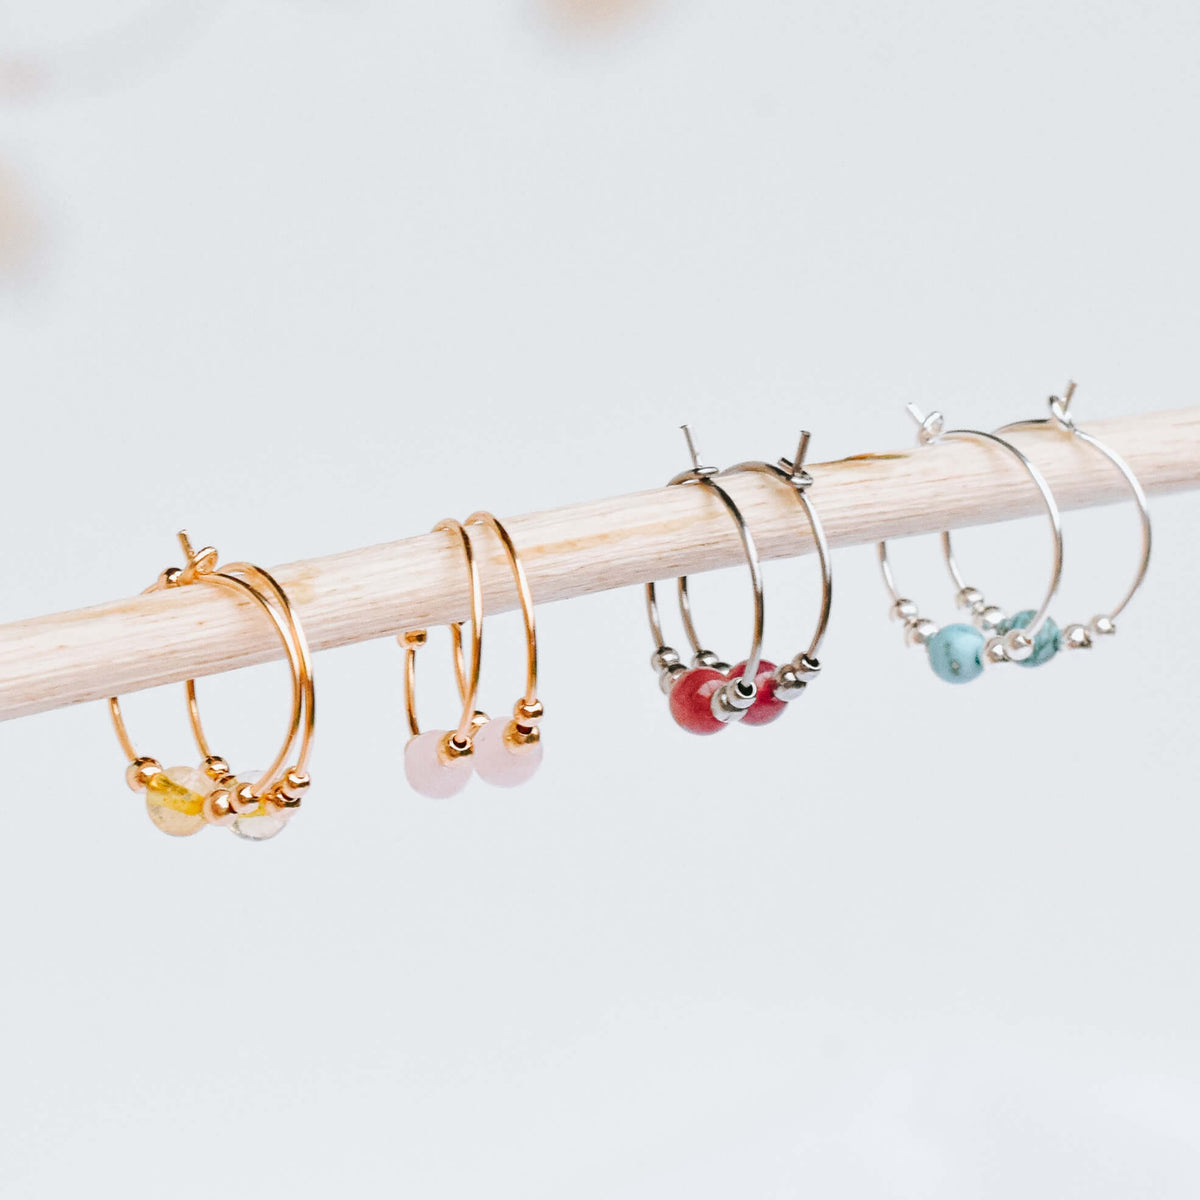 Tiny Bead Hoops - 14K Gold Fill - Sterling Silver - Stainless Steel - 14K Rose Gold Fill - Luna Tide Handmade Jewellery